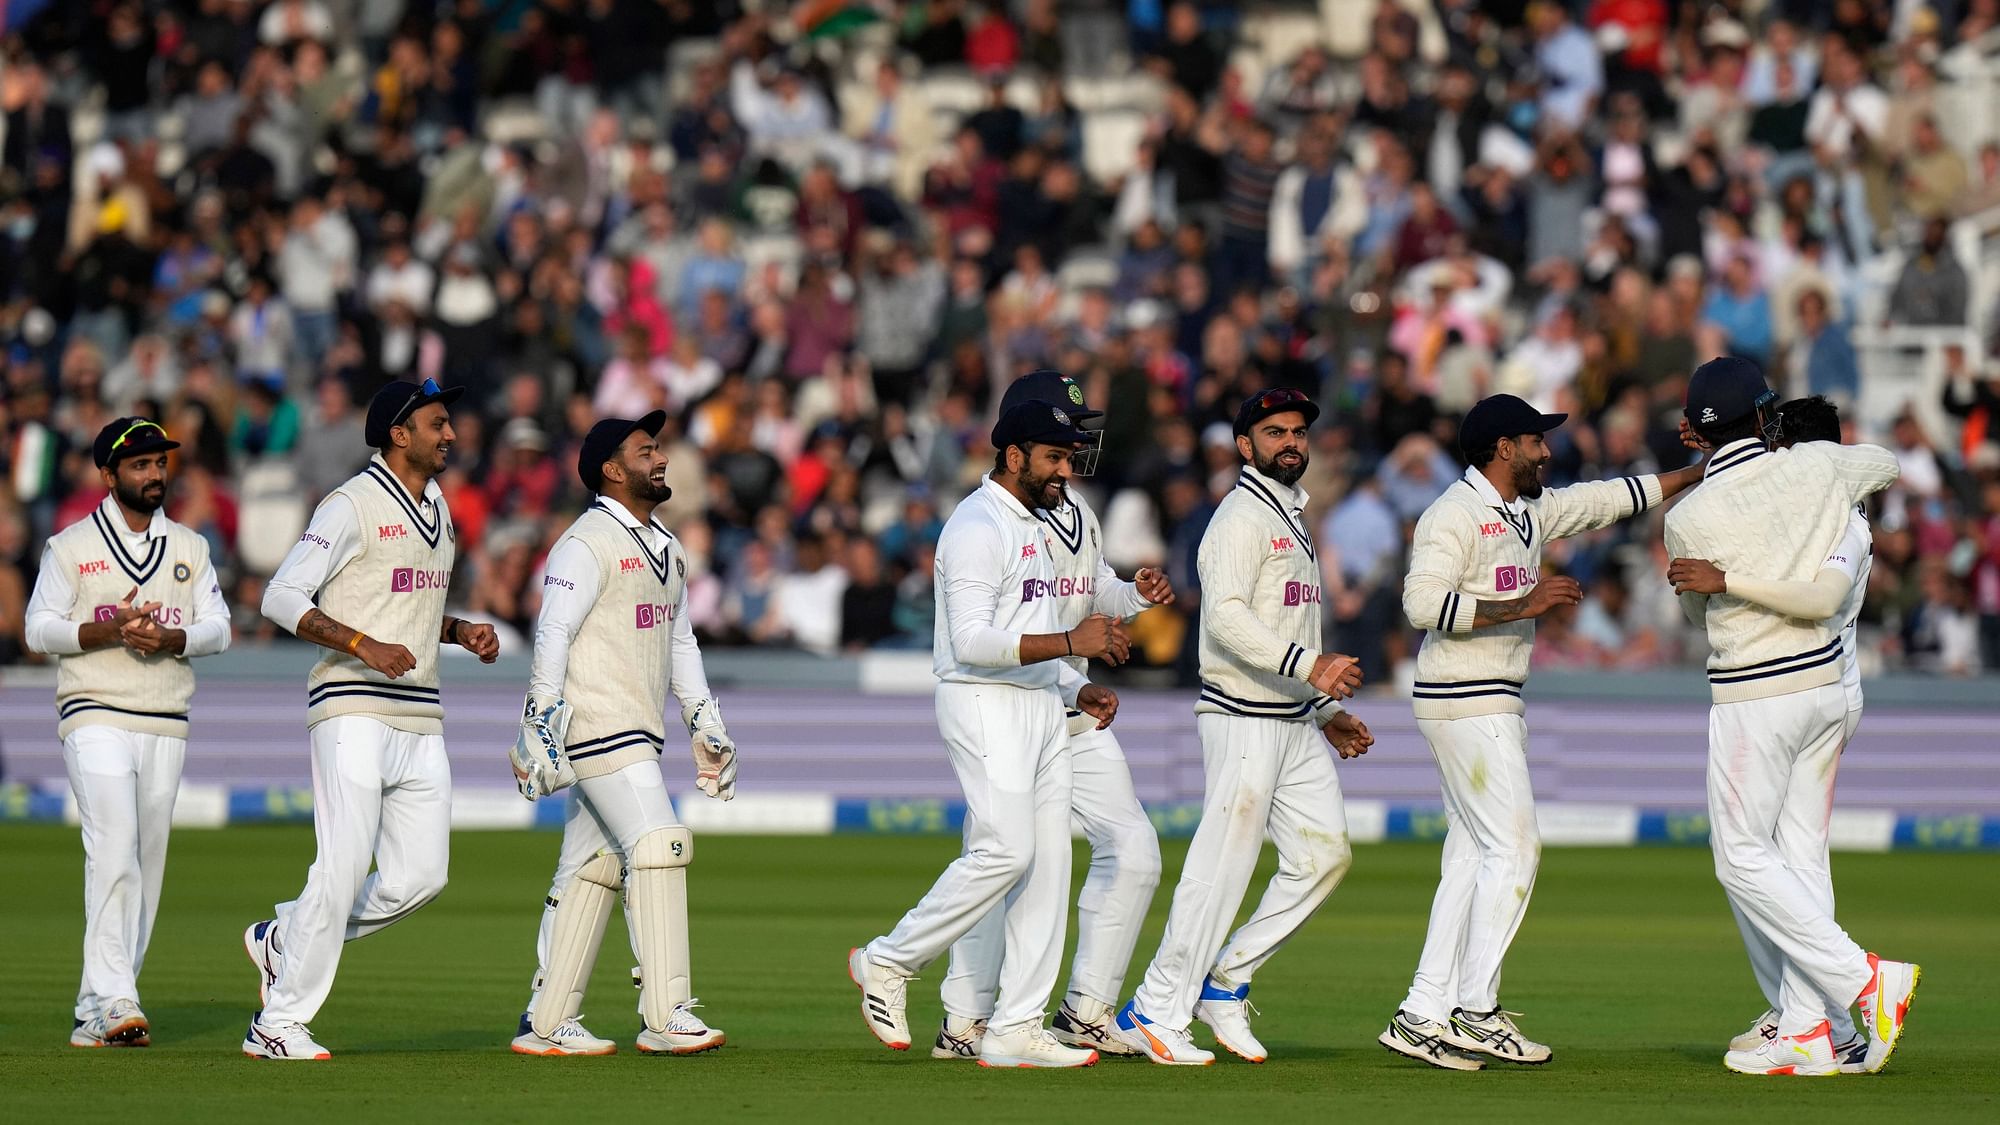 <div class="paragraphs"><p>A victorious Indian team marches back to the pavilion after beating England by 151 runs in the second Test match.&nbsp;</p></div>